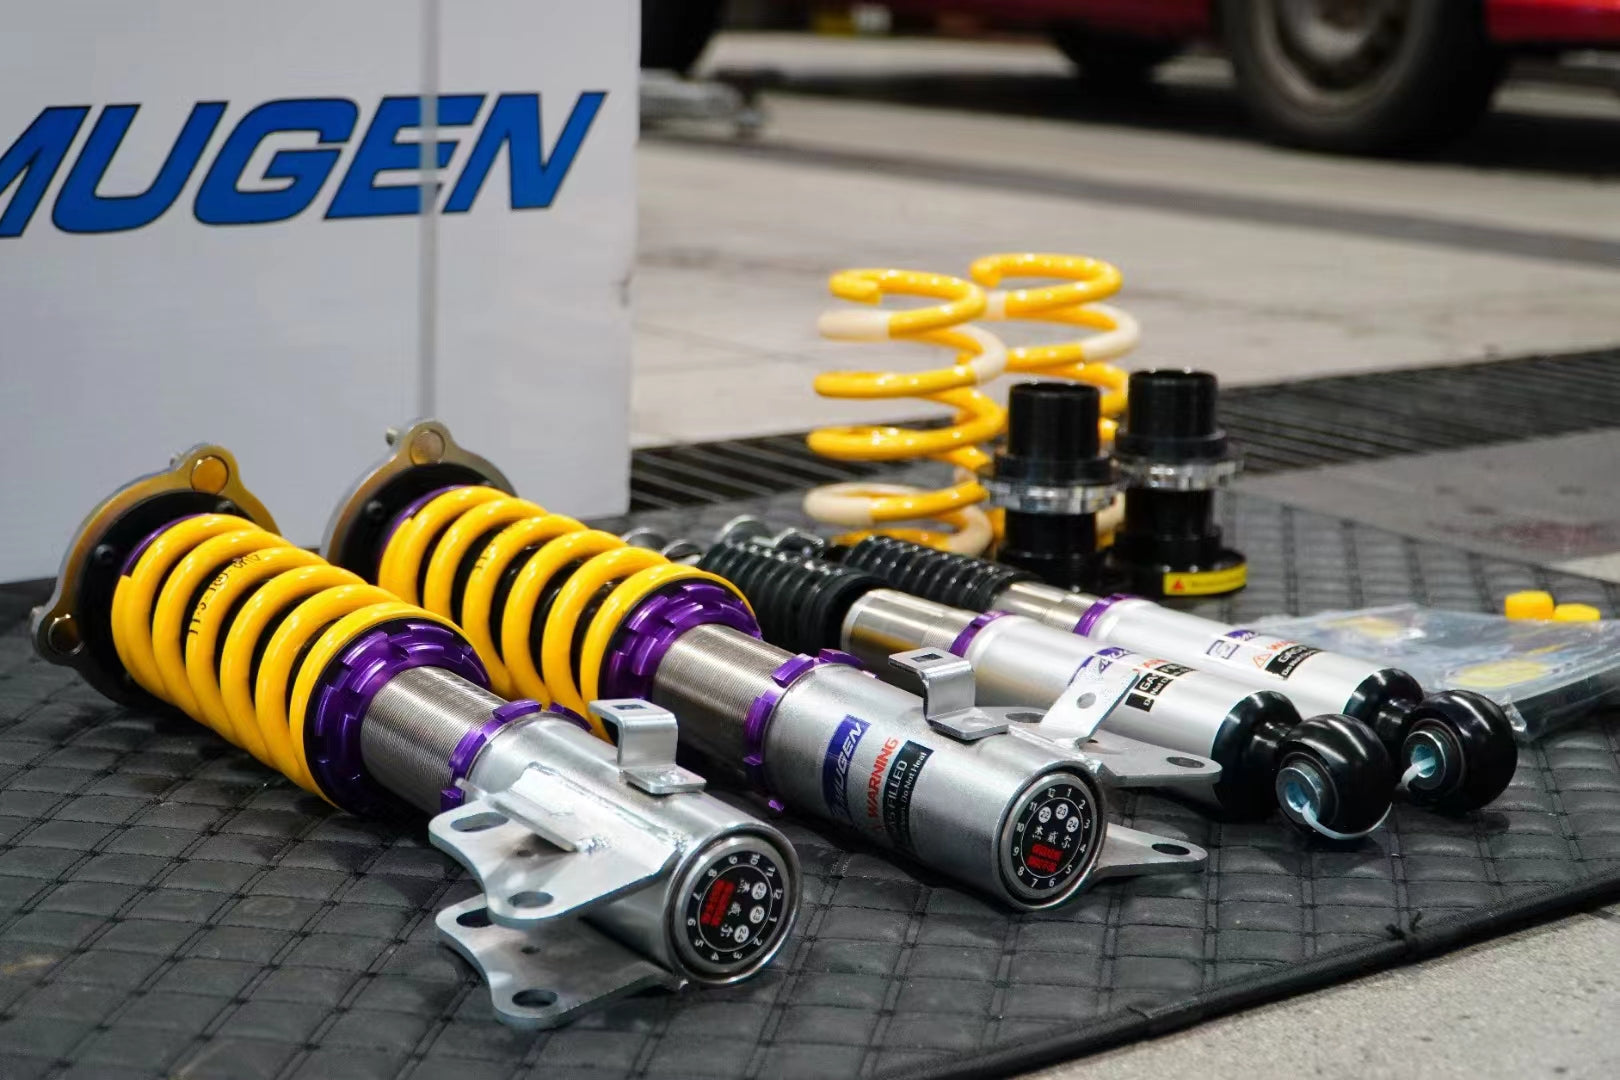 Gd Mugen Toyota Corolla 12th Gen 18-up Racing Pro Coilovers